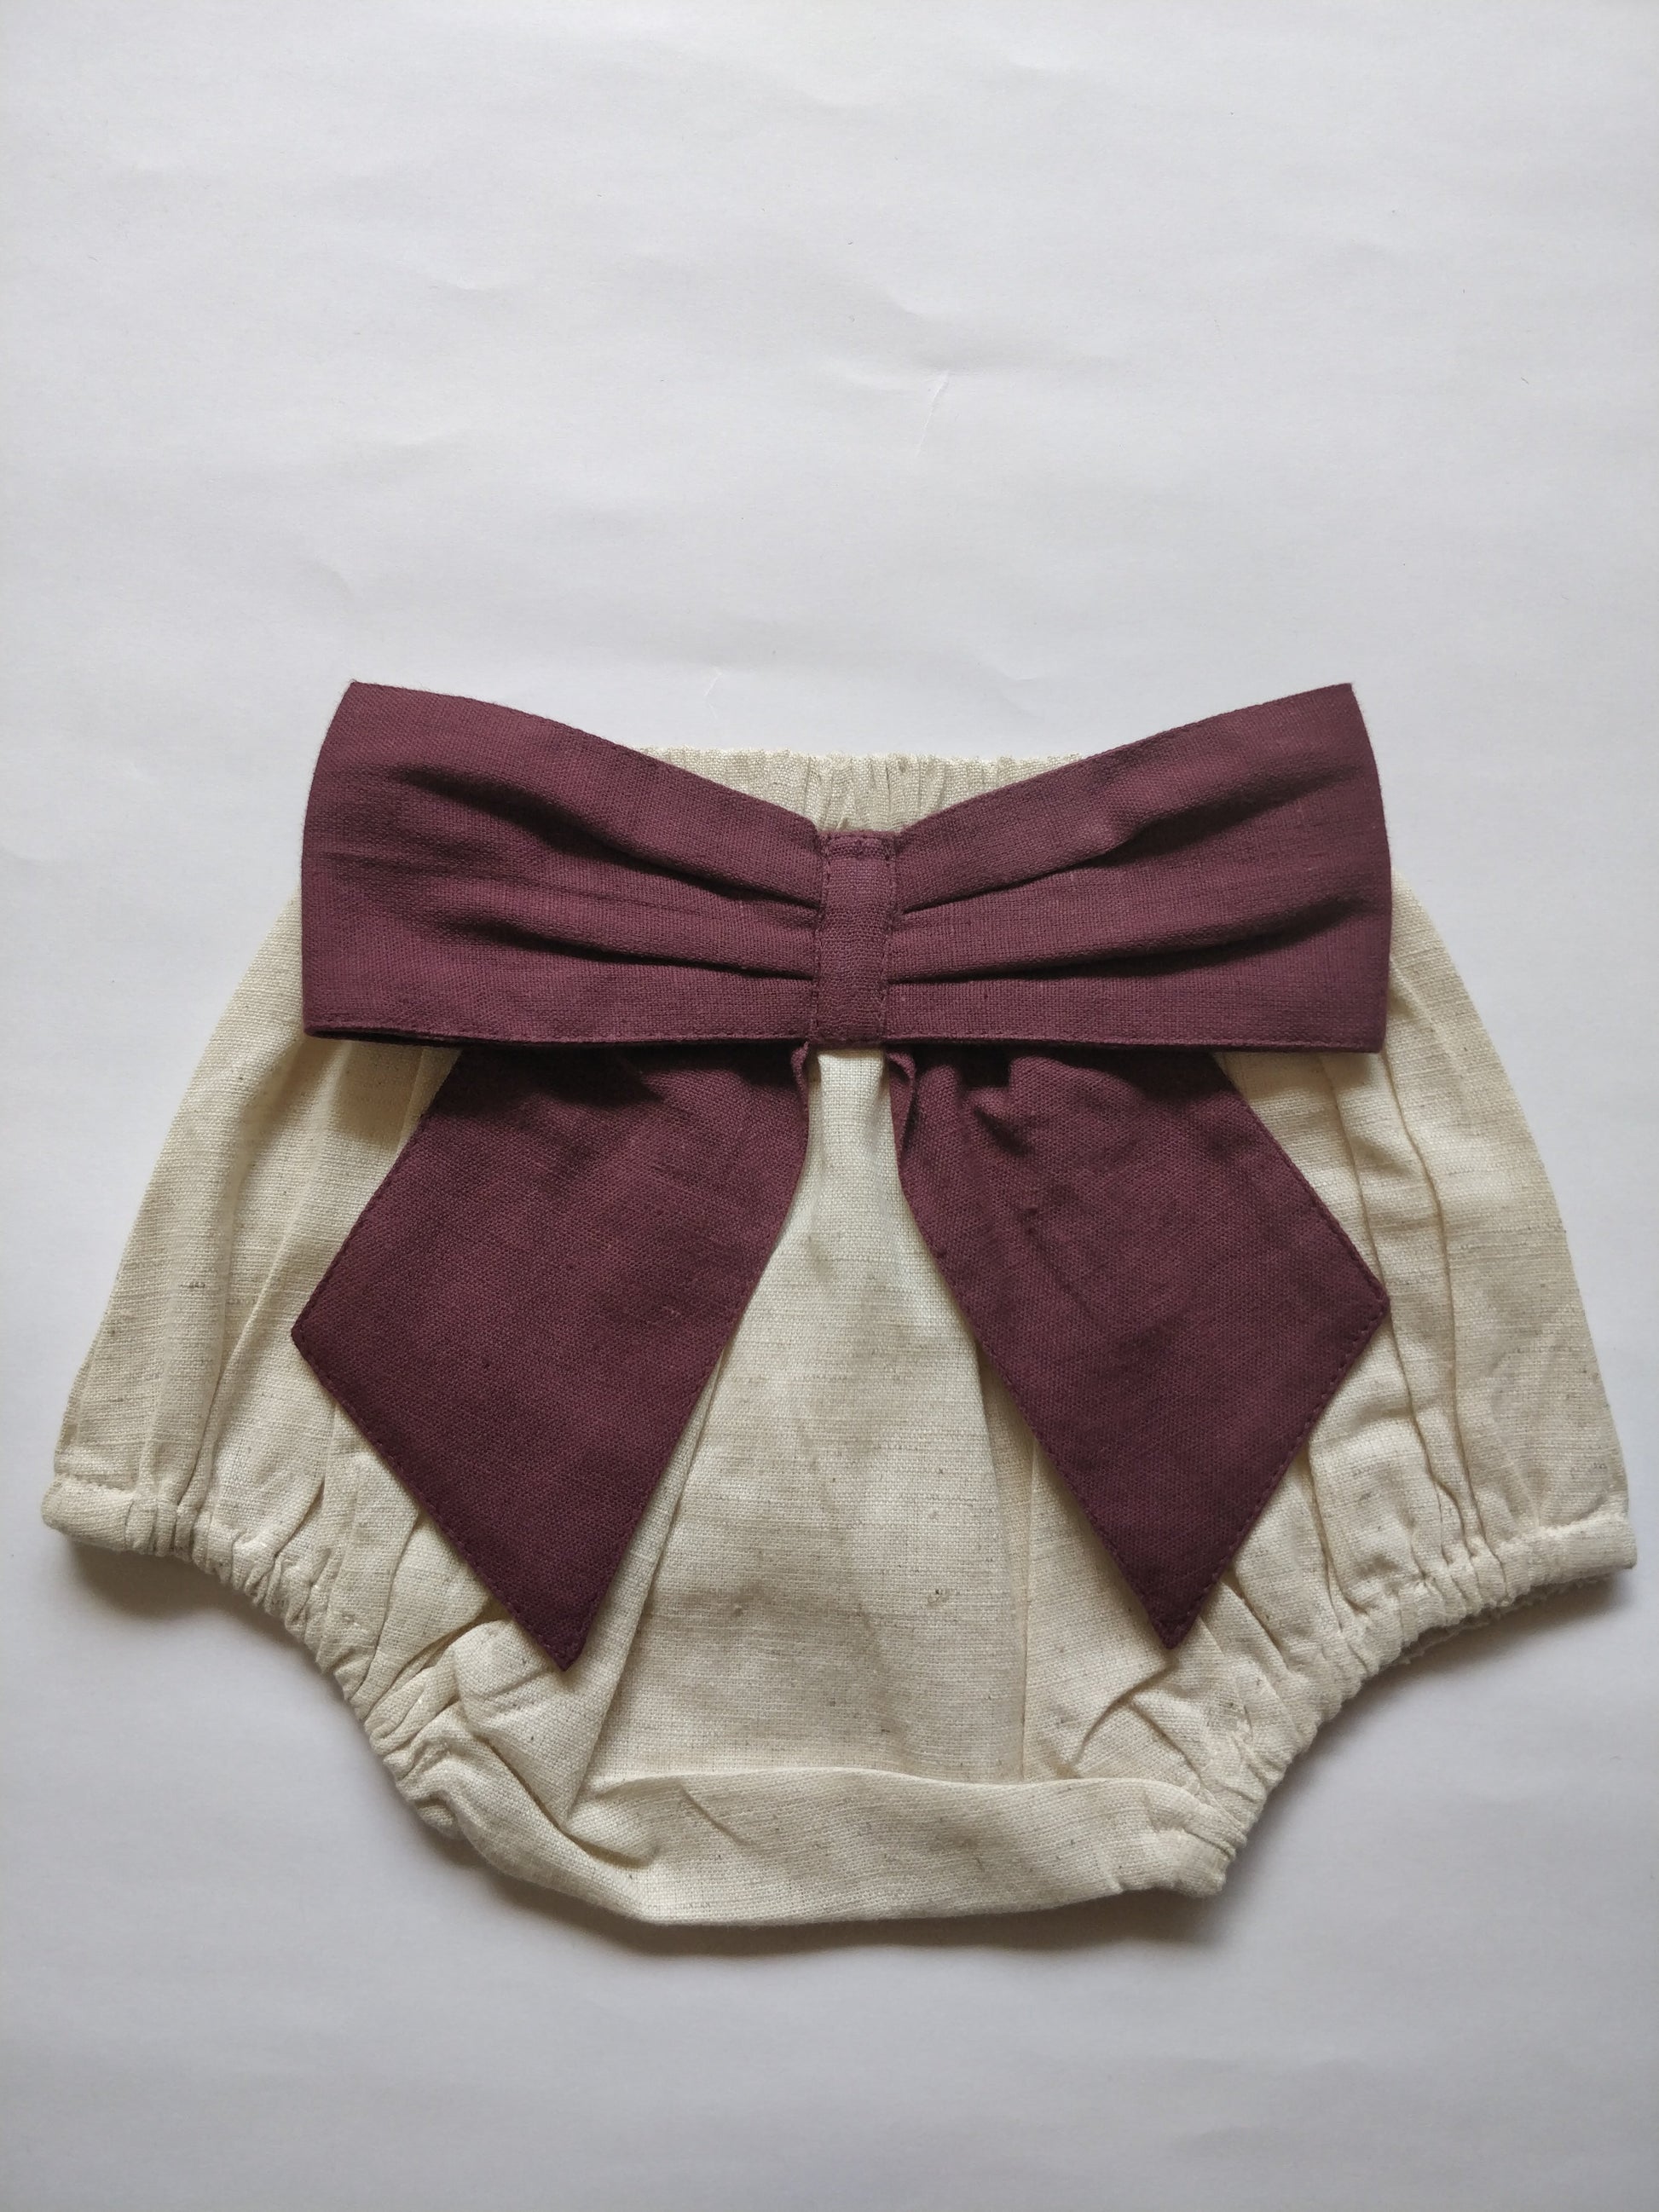 Set of 3 - Ivory Diaper Covers with Contrast Bows in Sage, Ochre & Burgundy.